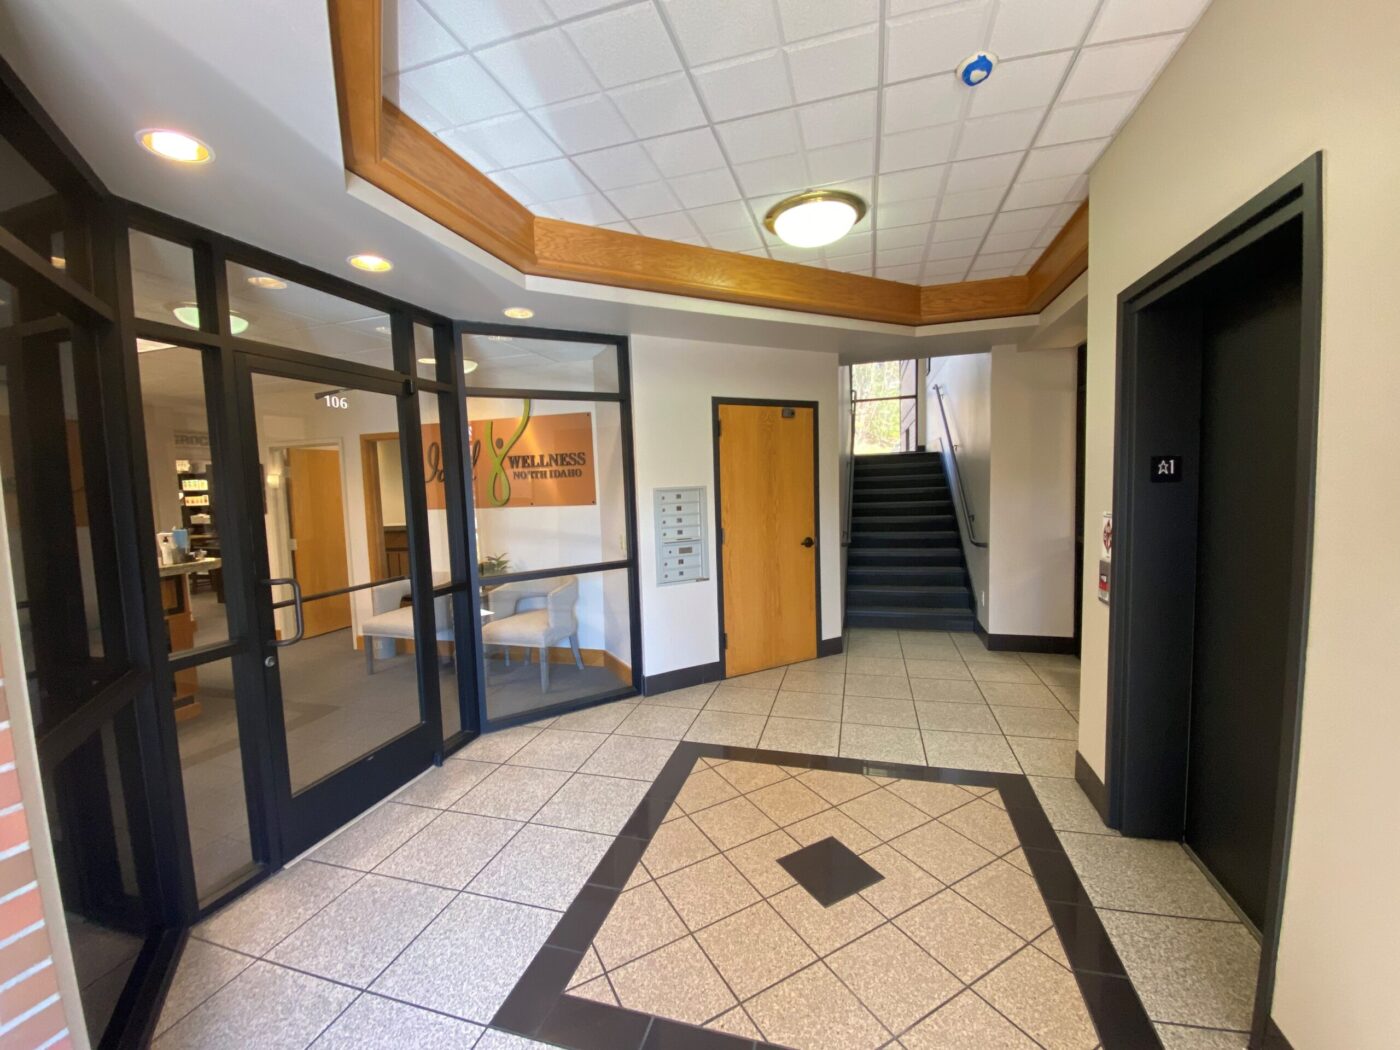 lobby, elevator, and glass office entrance